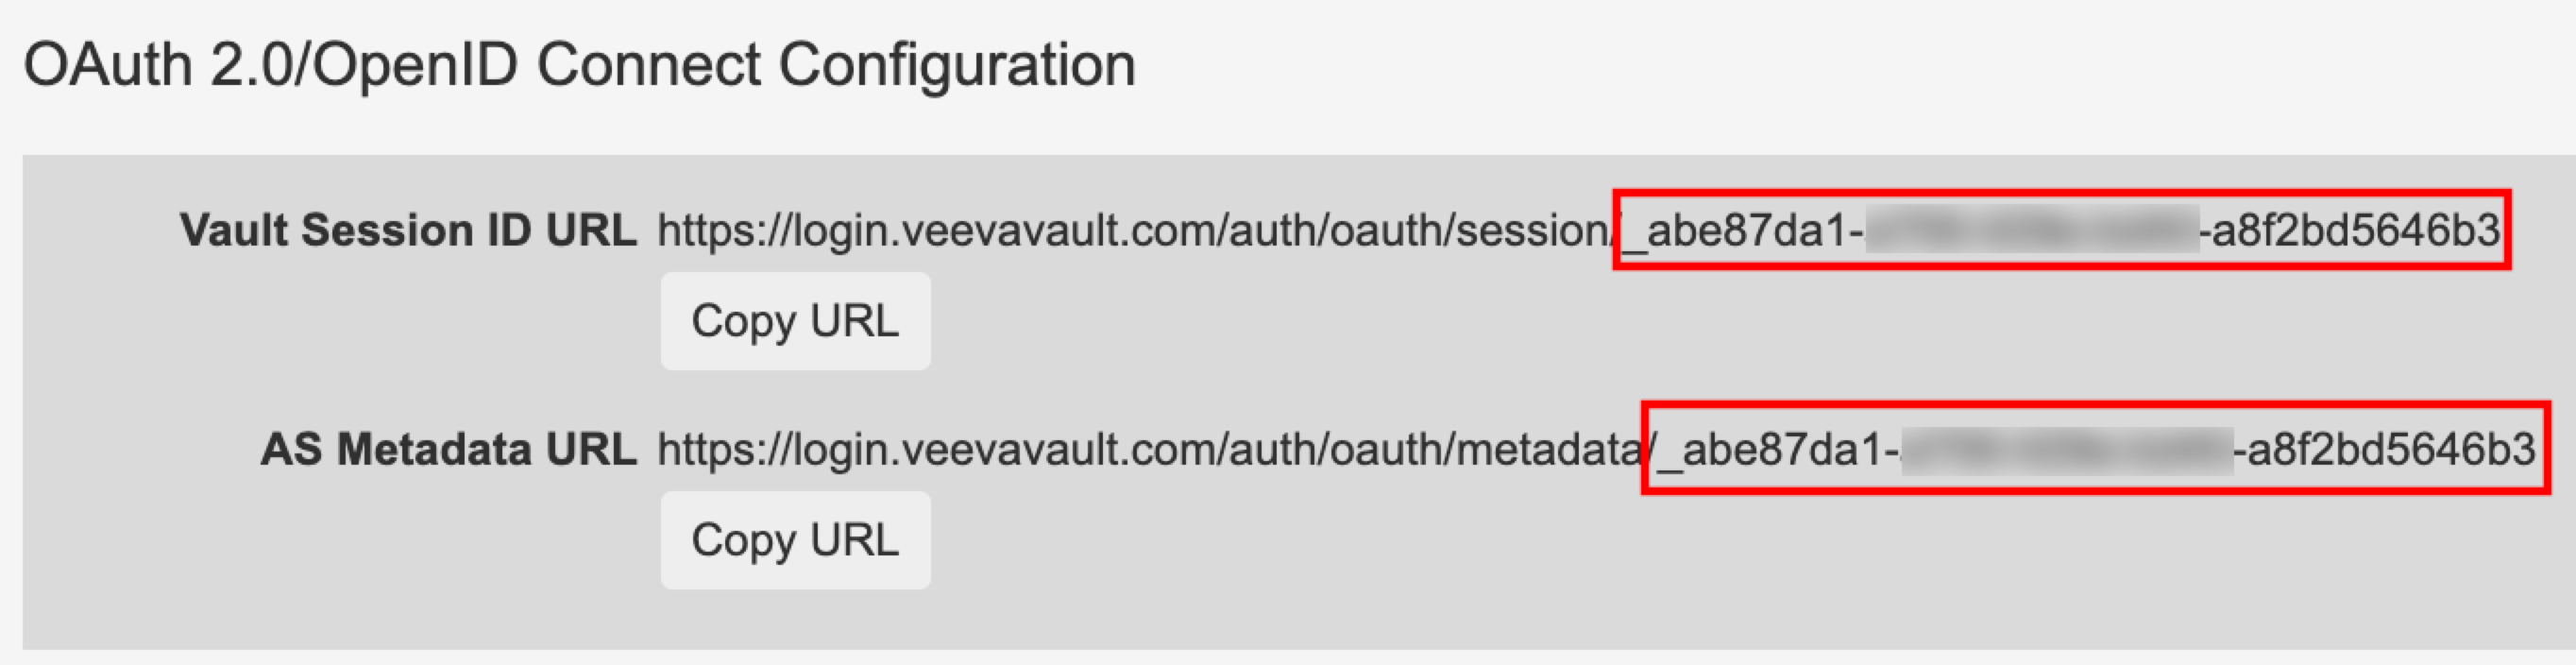 Vault Session ID URL and AS Metadata URL fields in a new window after creating the profile